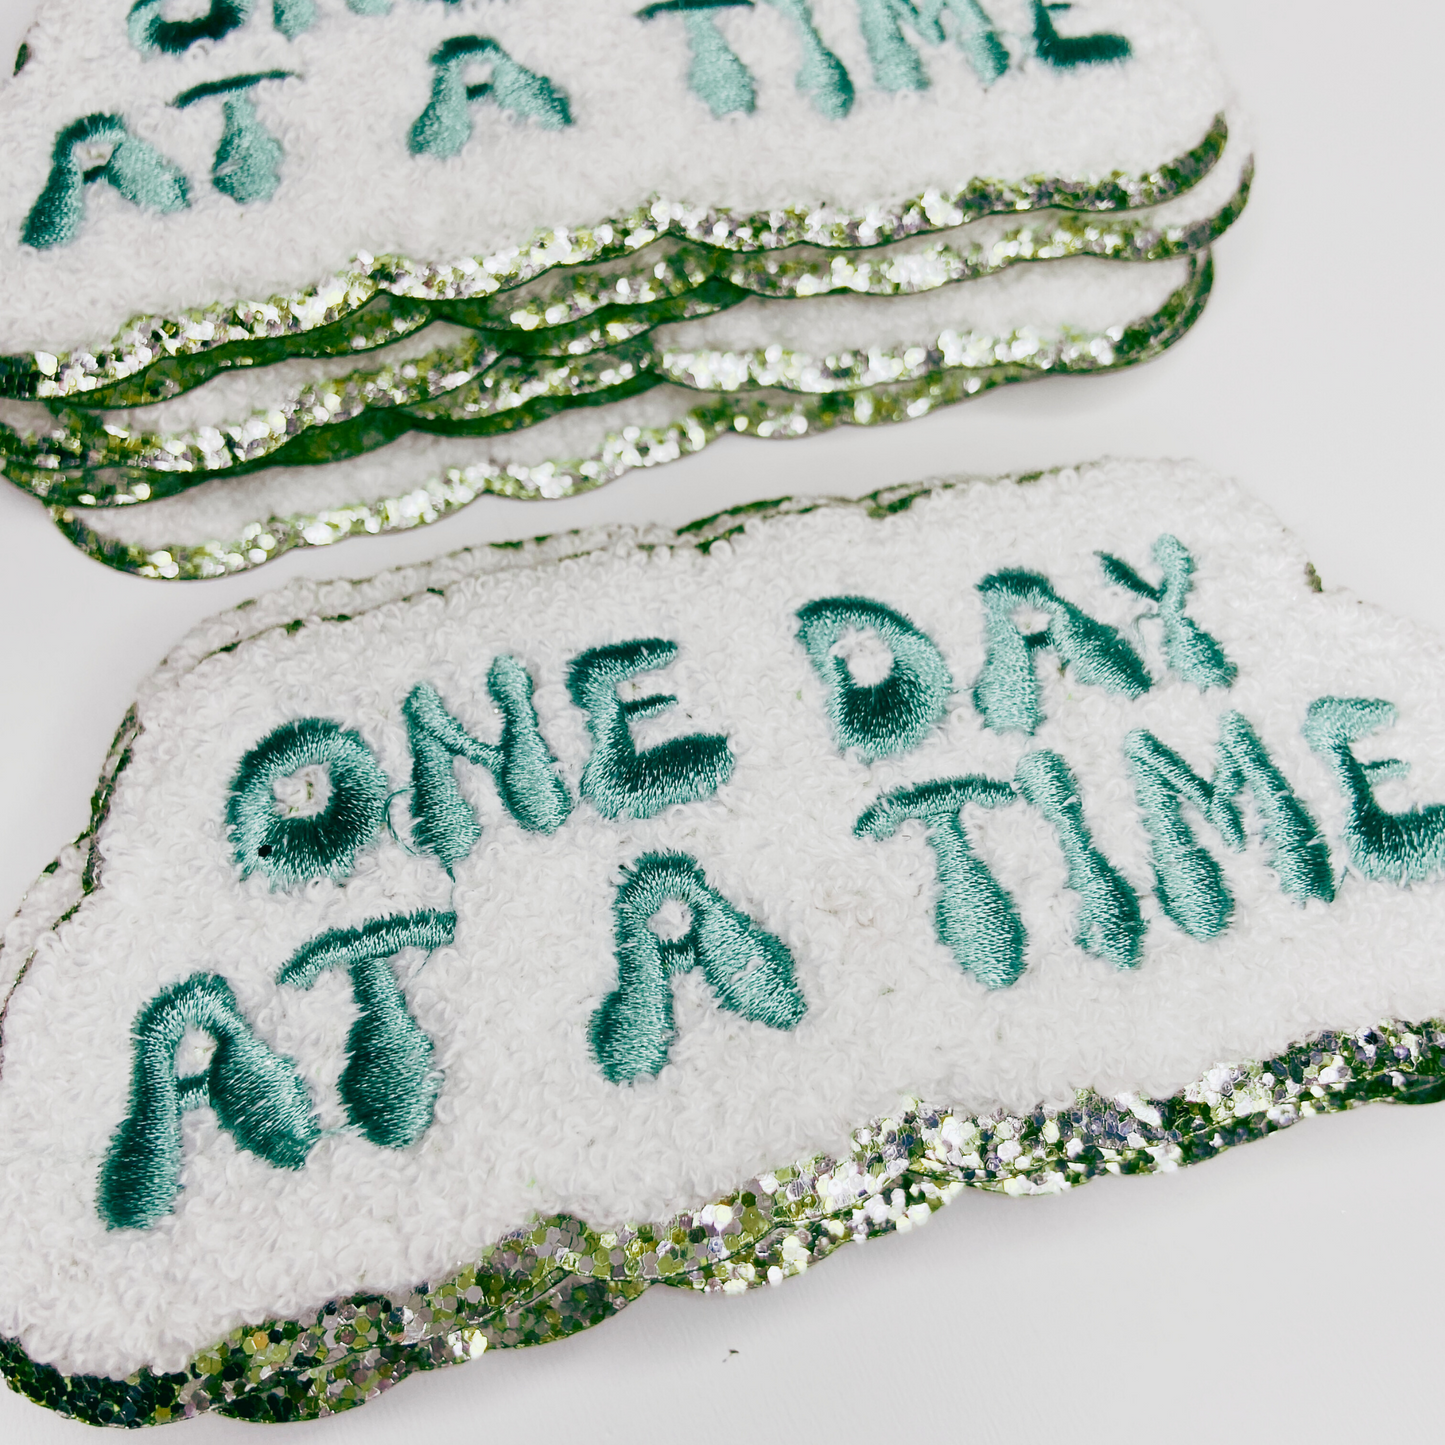 4” One Day at a Time with Embroidery detail - Chenille Patch